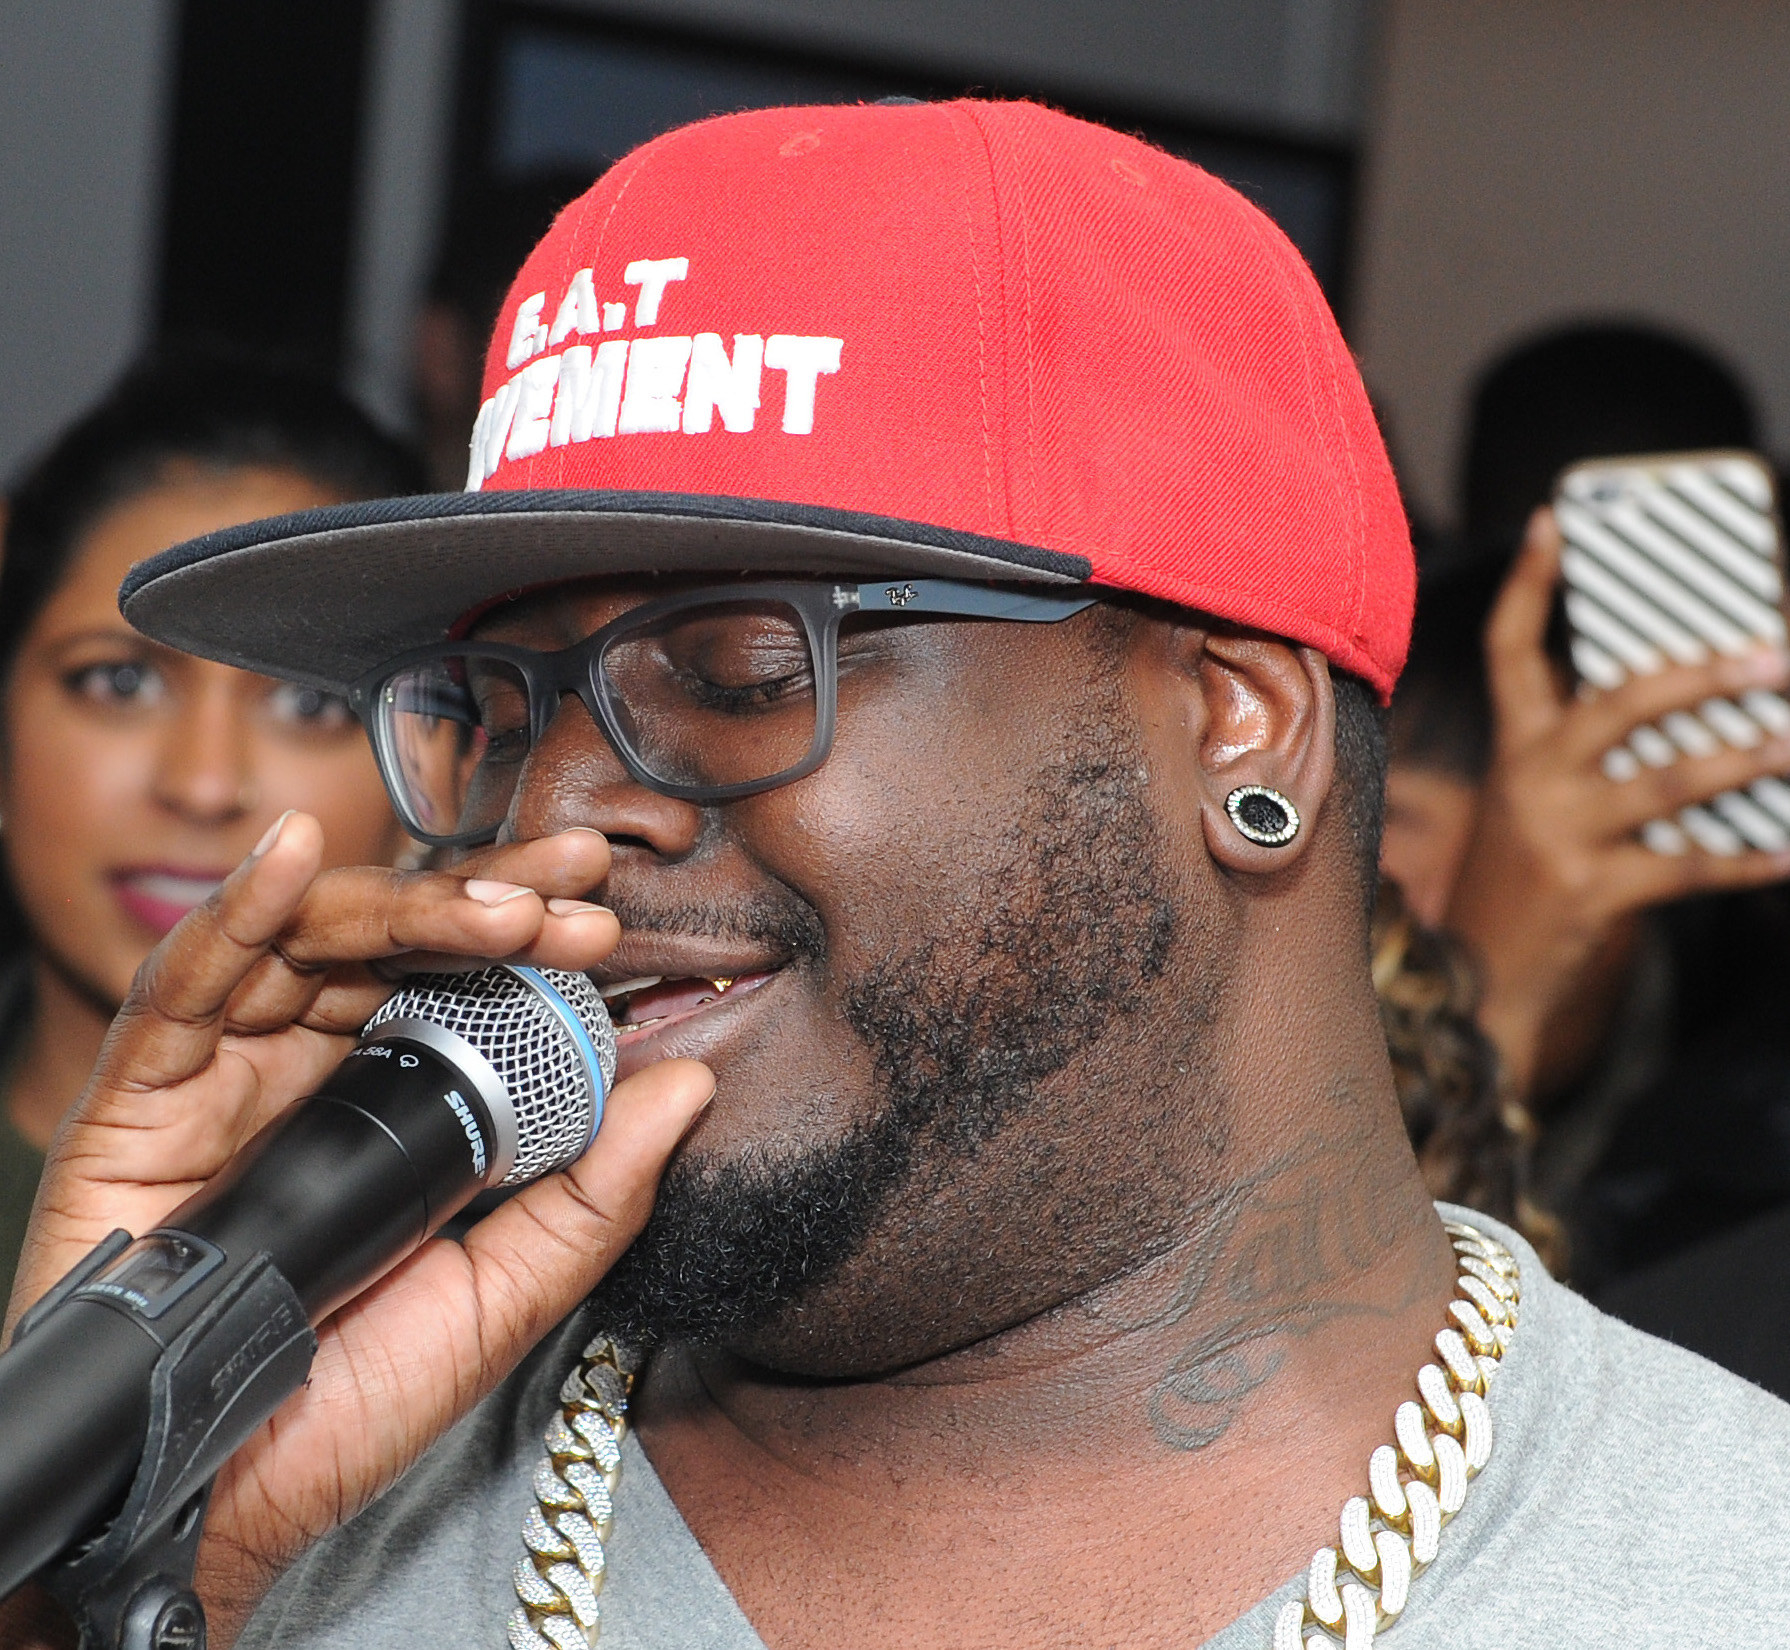 T-Pain with a microphone and showing his &quot;Tattoo&quot; tat